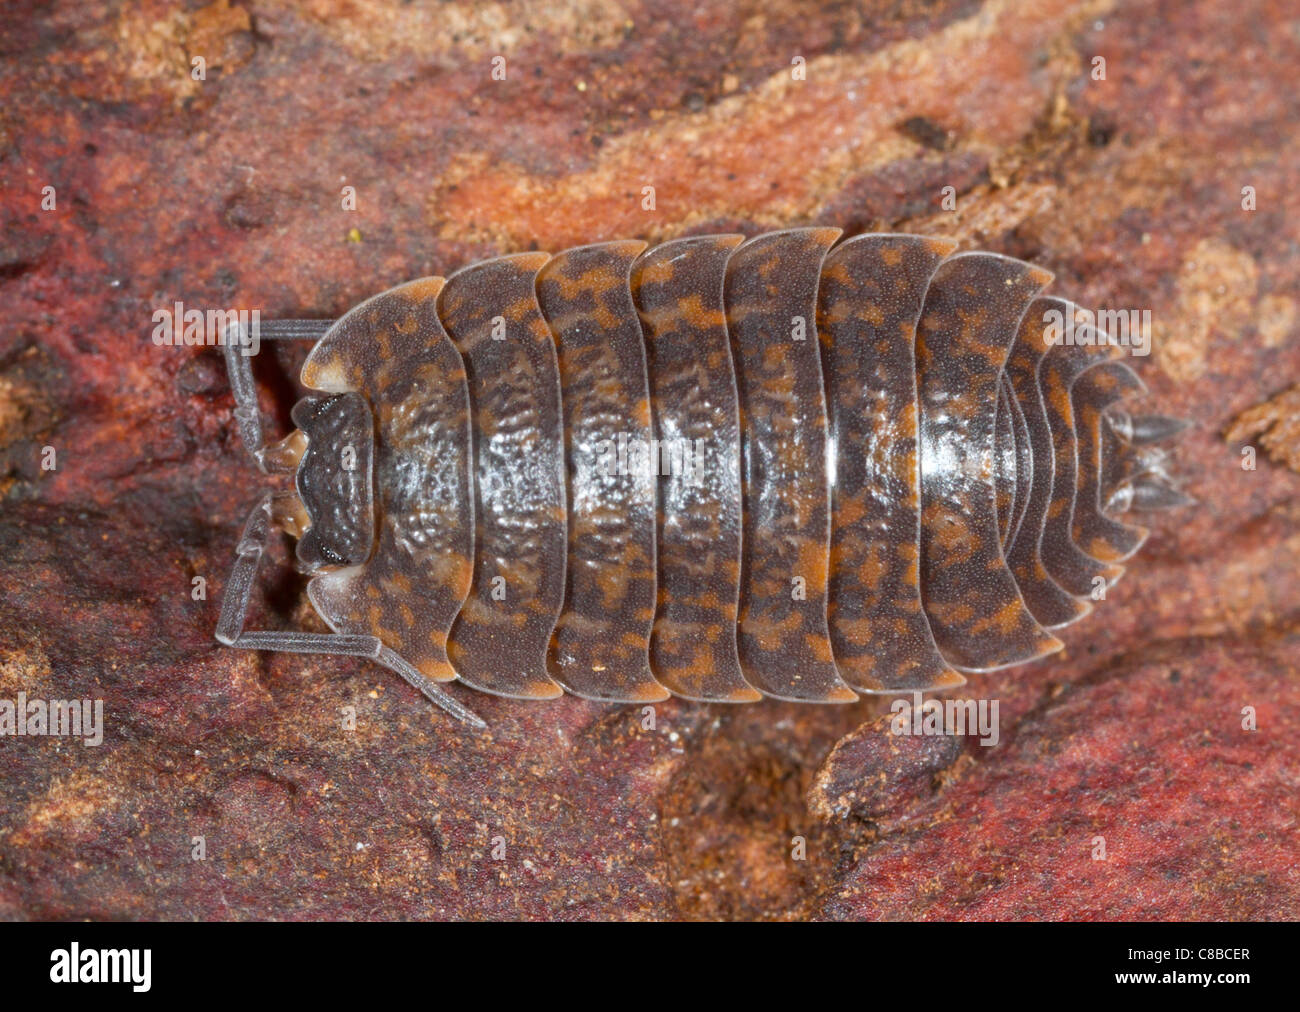 A Brown Spotted Woodlouse photohraphed in nature Stock Photo